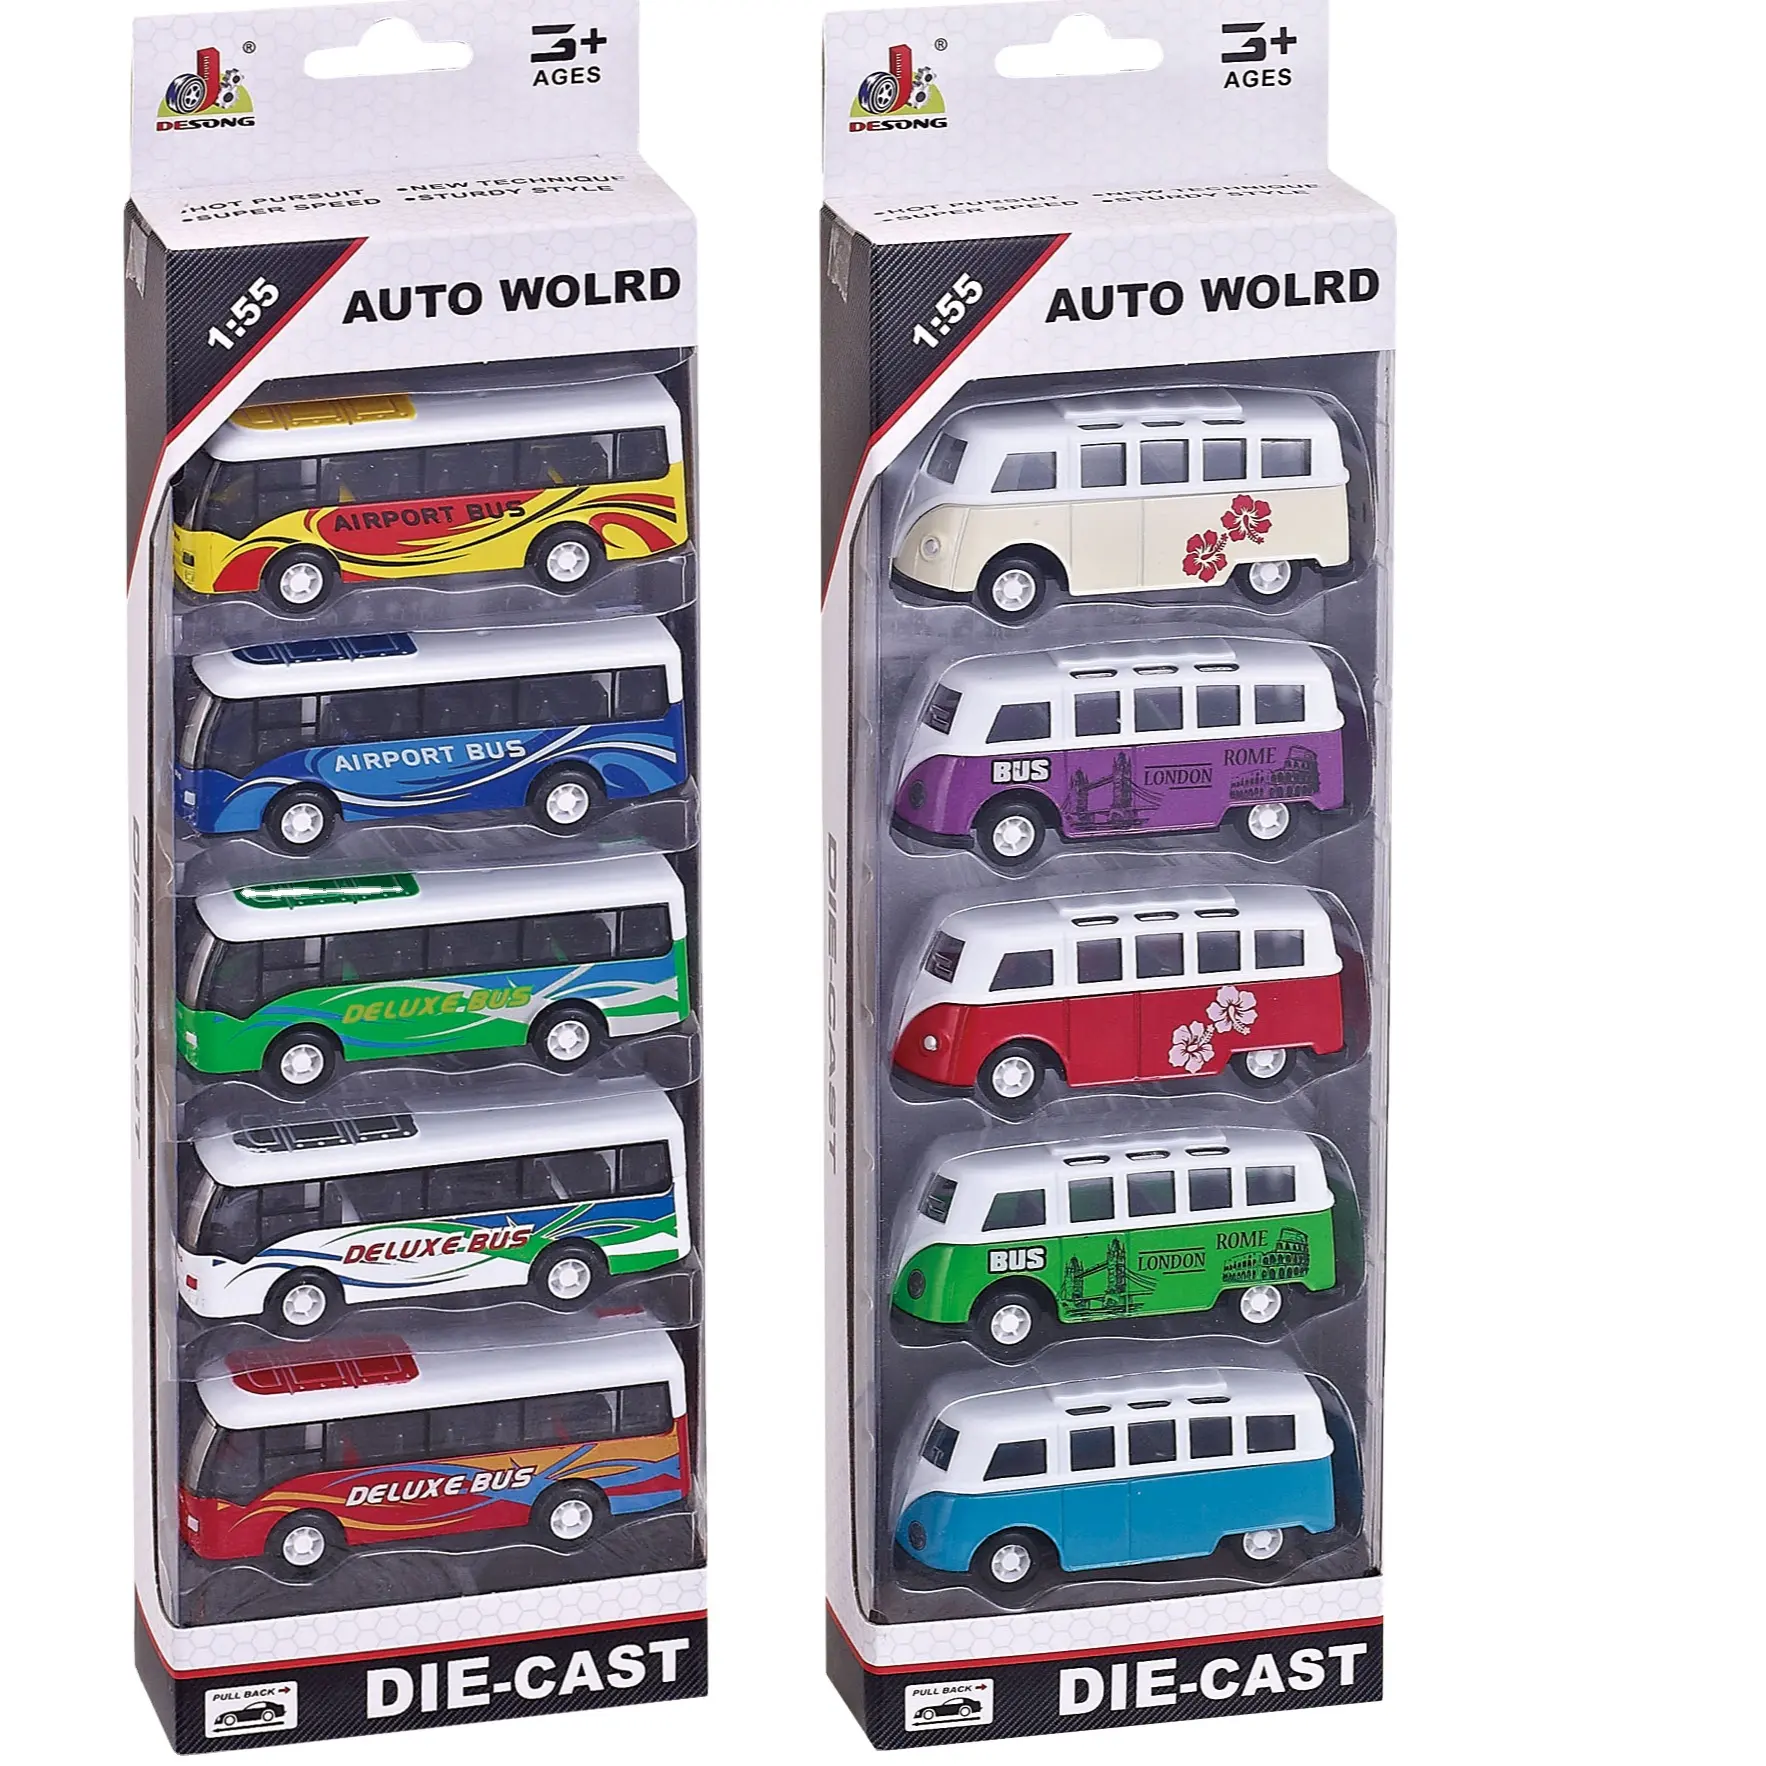 Car Toys Mini Bus Pull Back Model Car Vehicles Toy Hot Sell Metal on Sales Products Small Kids Color Box Unisex 1:64 Diecast Toy